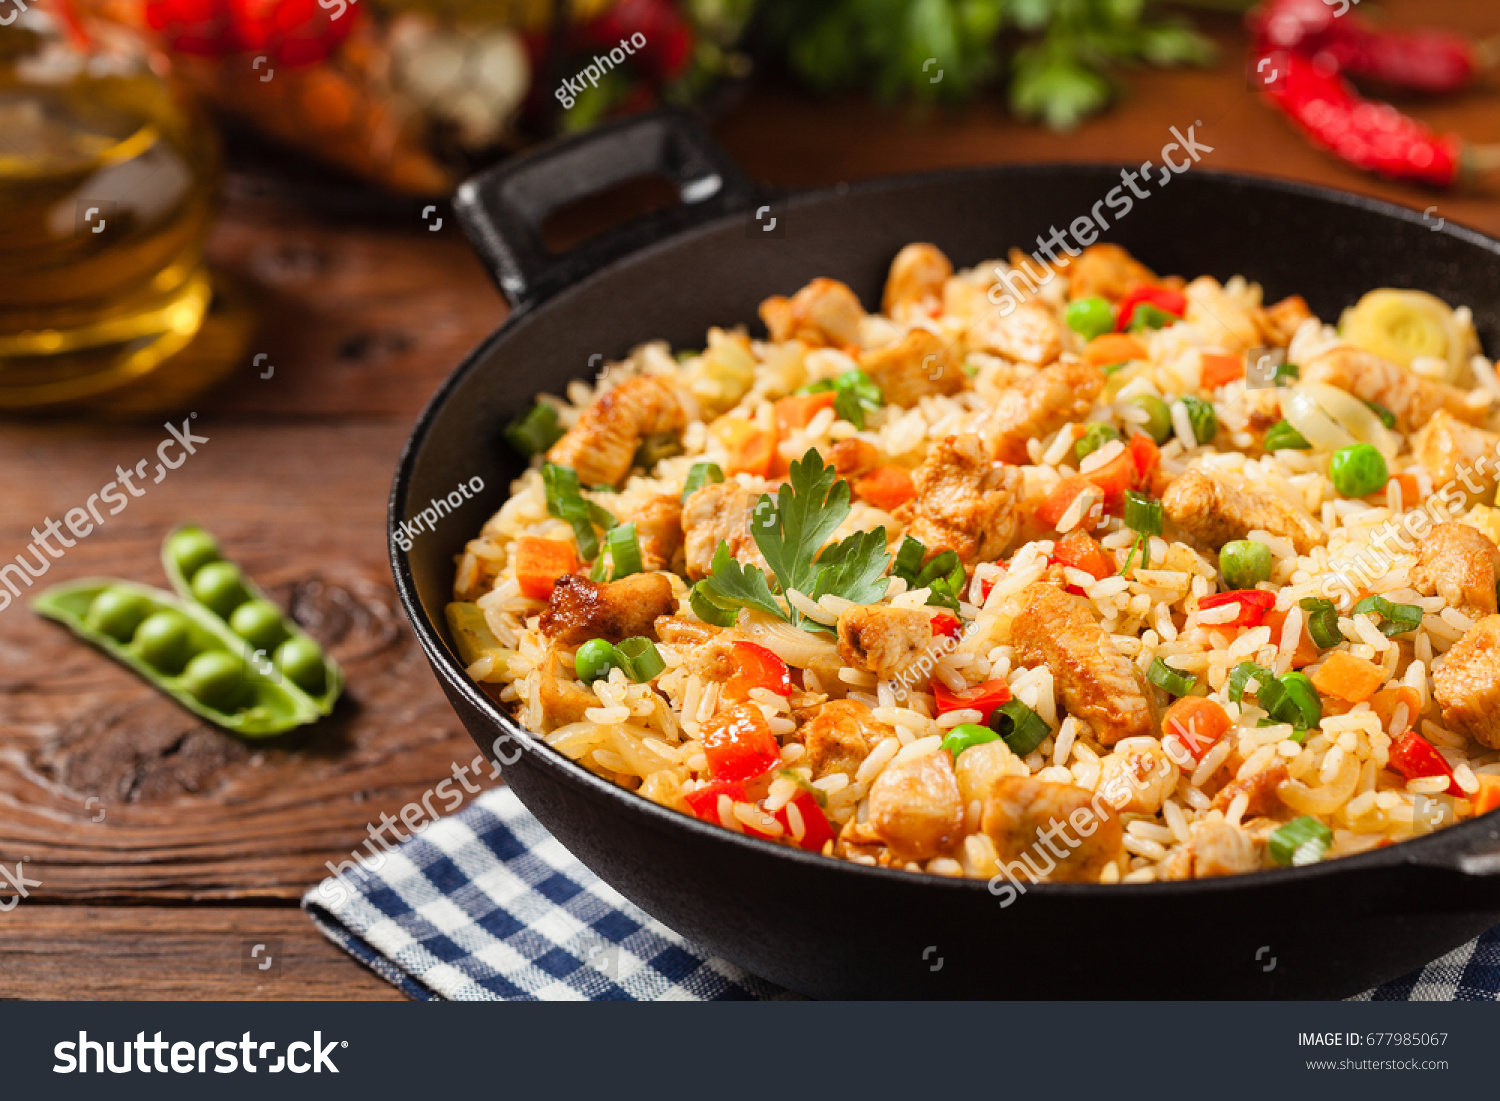 Fried rice with chicken. Prepared and served in a wok. Natural wood in the background. Front view. #677985067